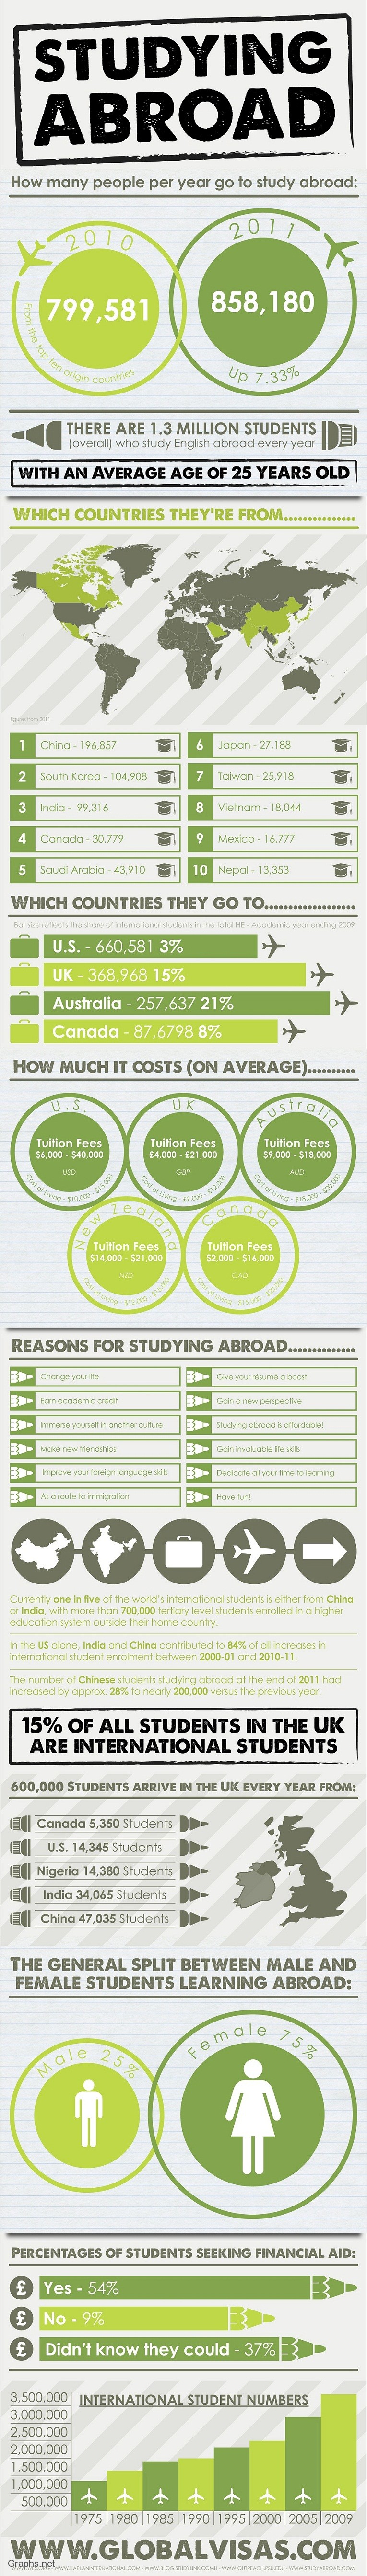 Studying abroad